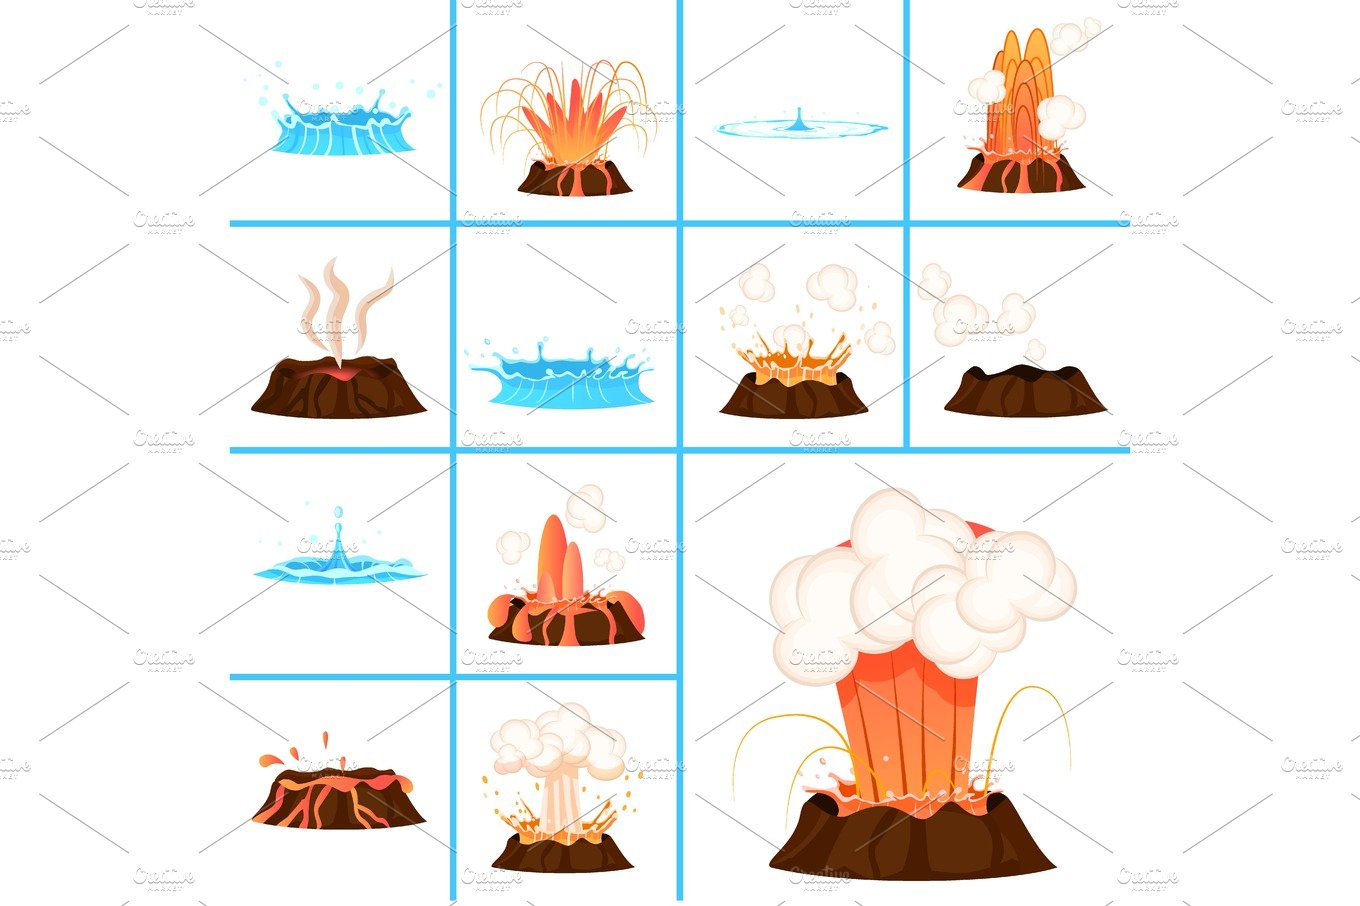 Hot Lava and Clear Water Splashes Illustrations cover image.